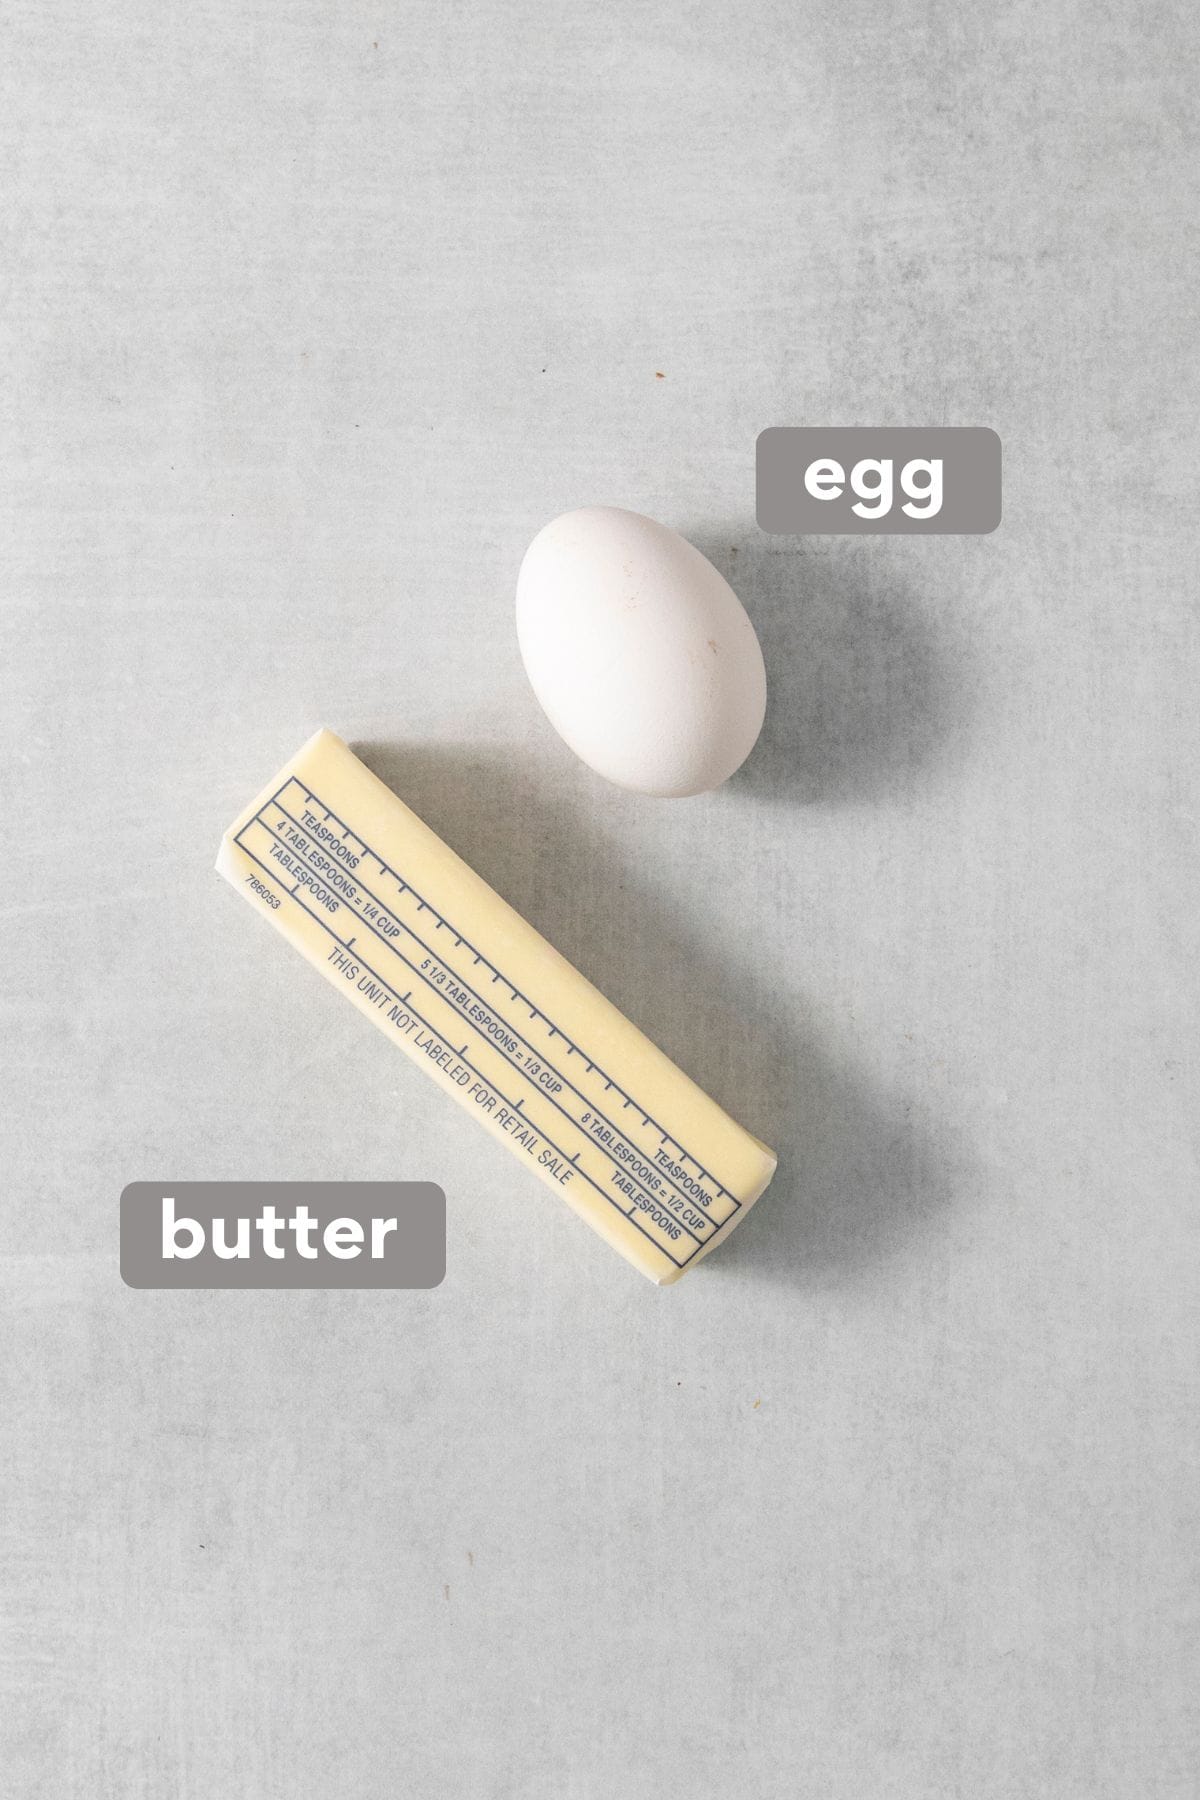 butter and egg on a countertop